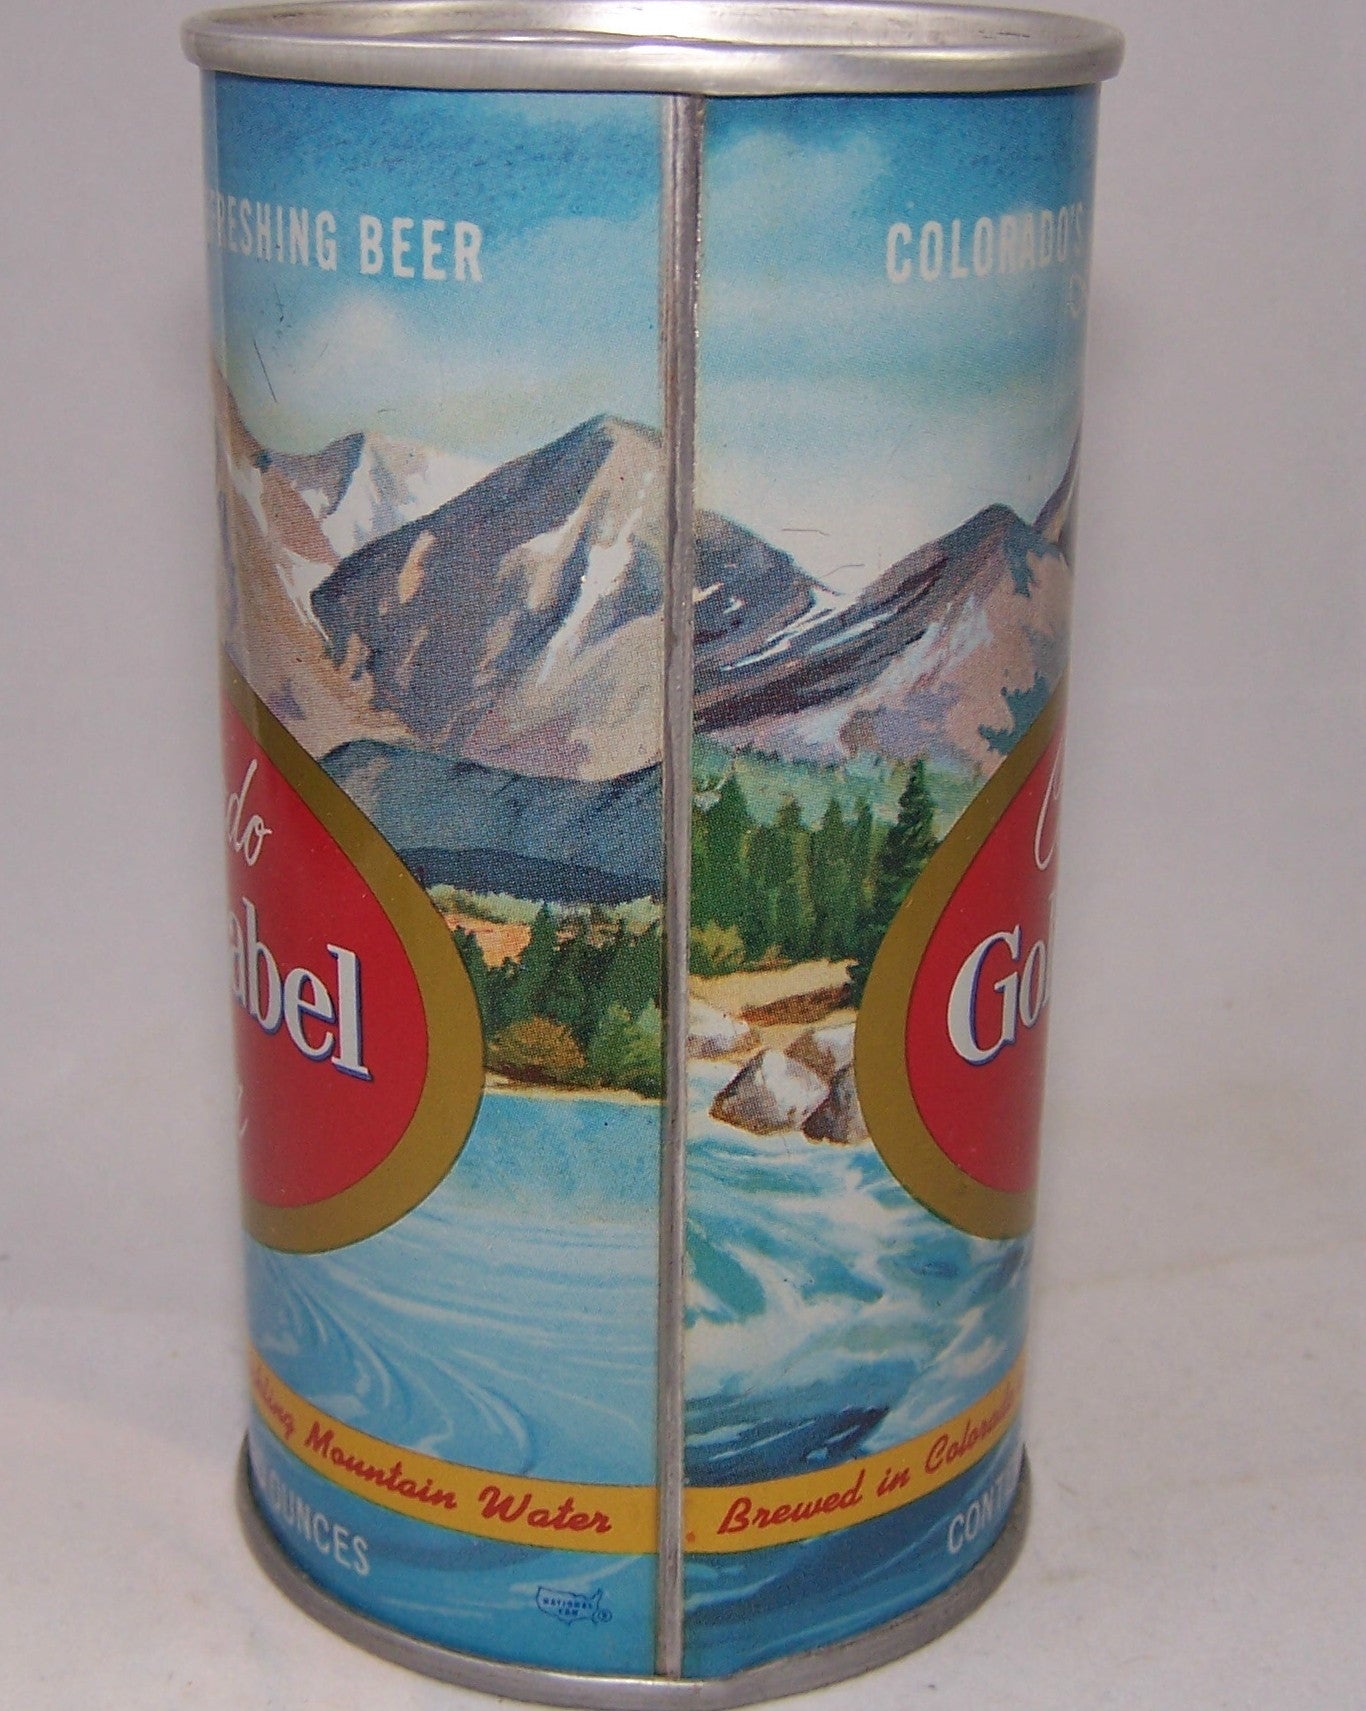 Colorado Gold Label (Test Can) USBC II 232-38, Grade A1+ Sold on 10/13/15